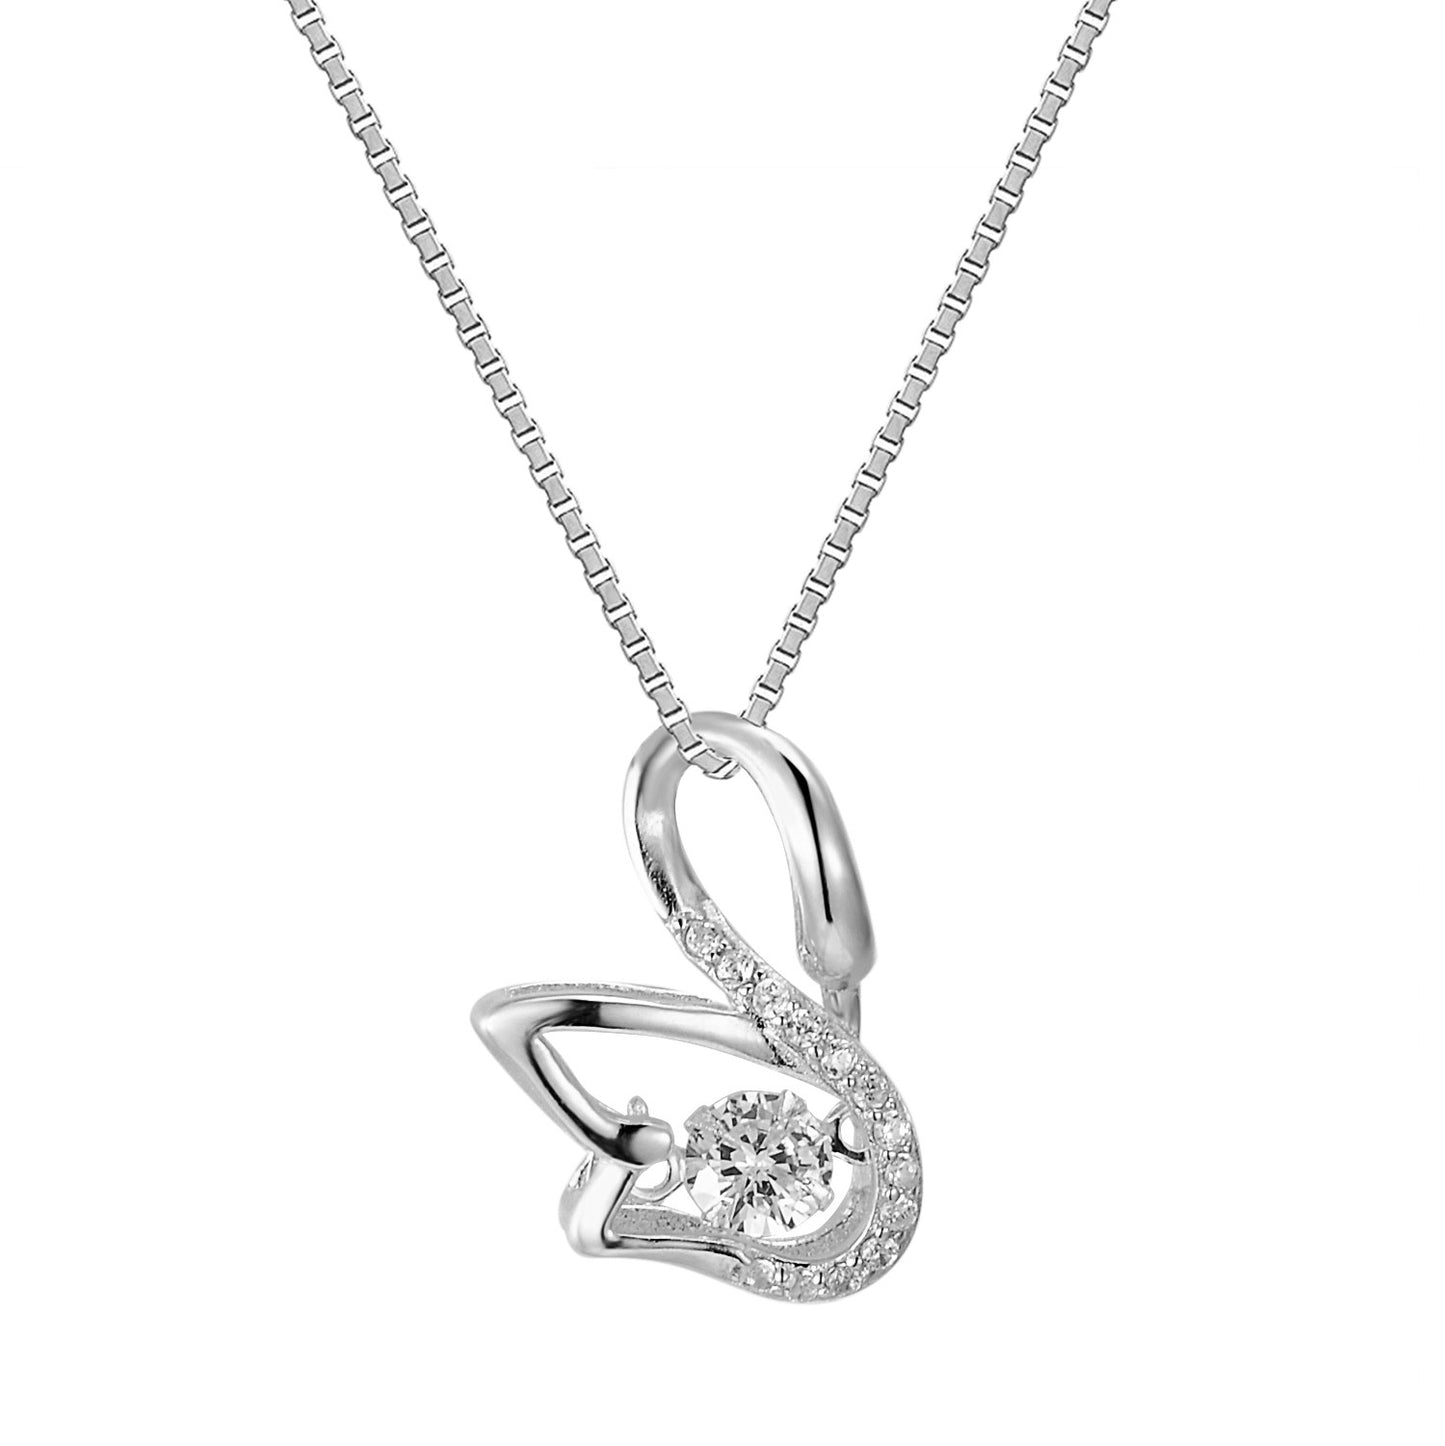 Sterling Silver Elegant Dancing Swan Solitaire Simulated Diamond Charm Pendant Free Chain